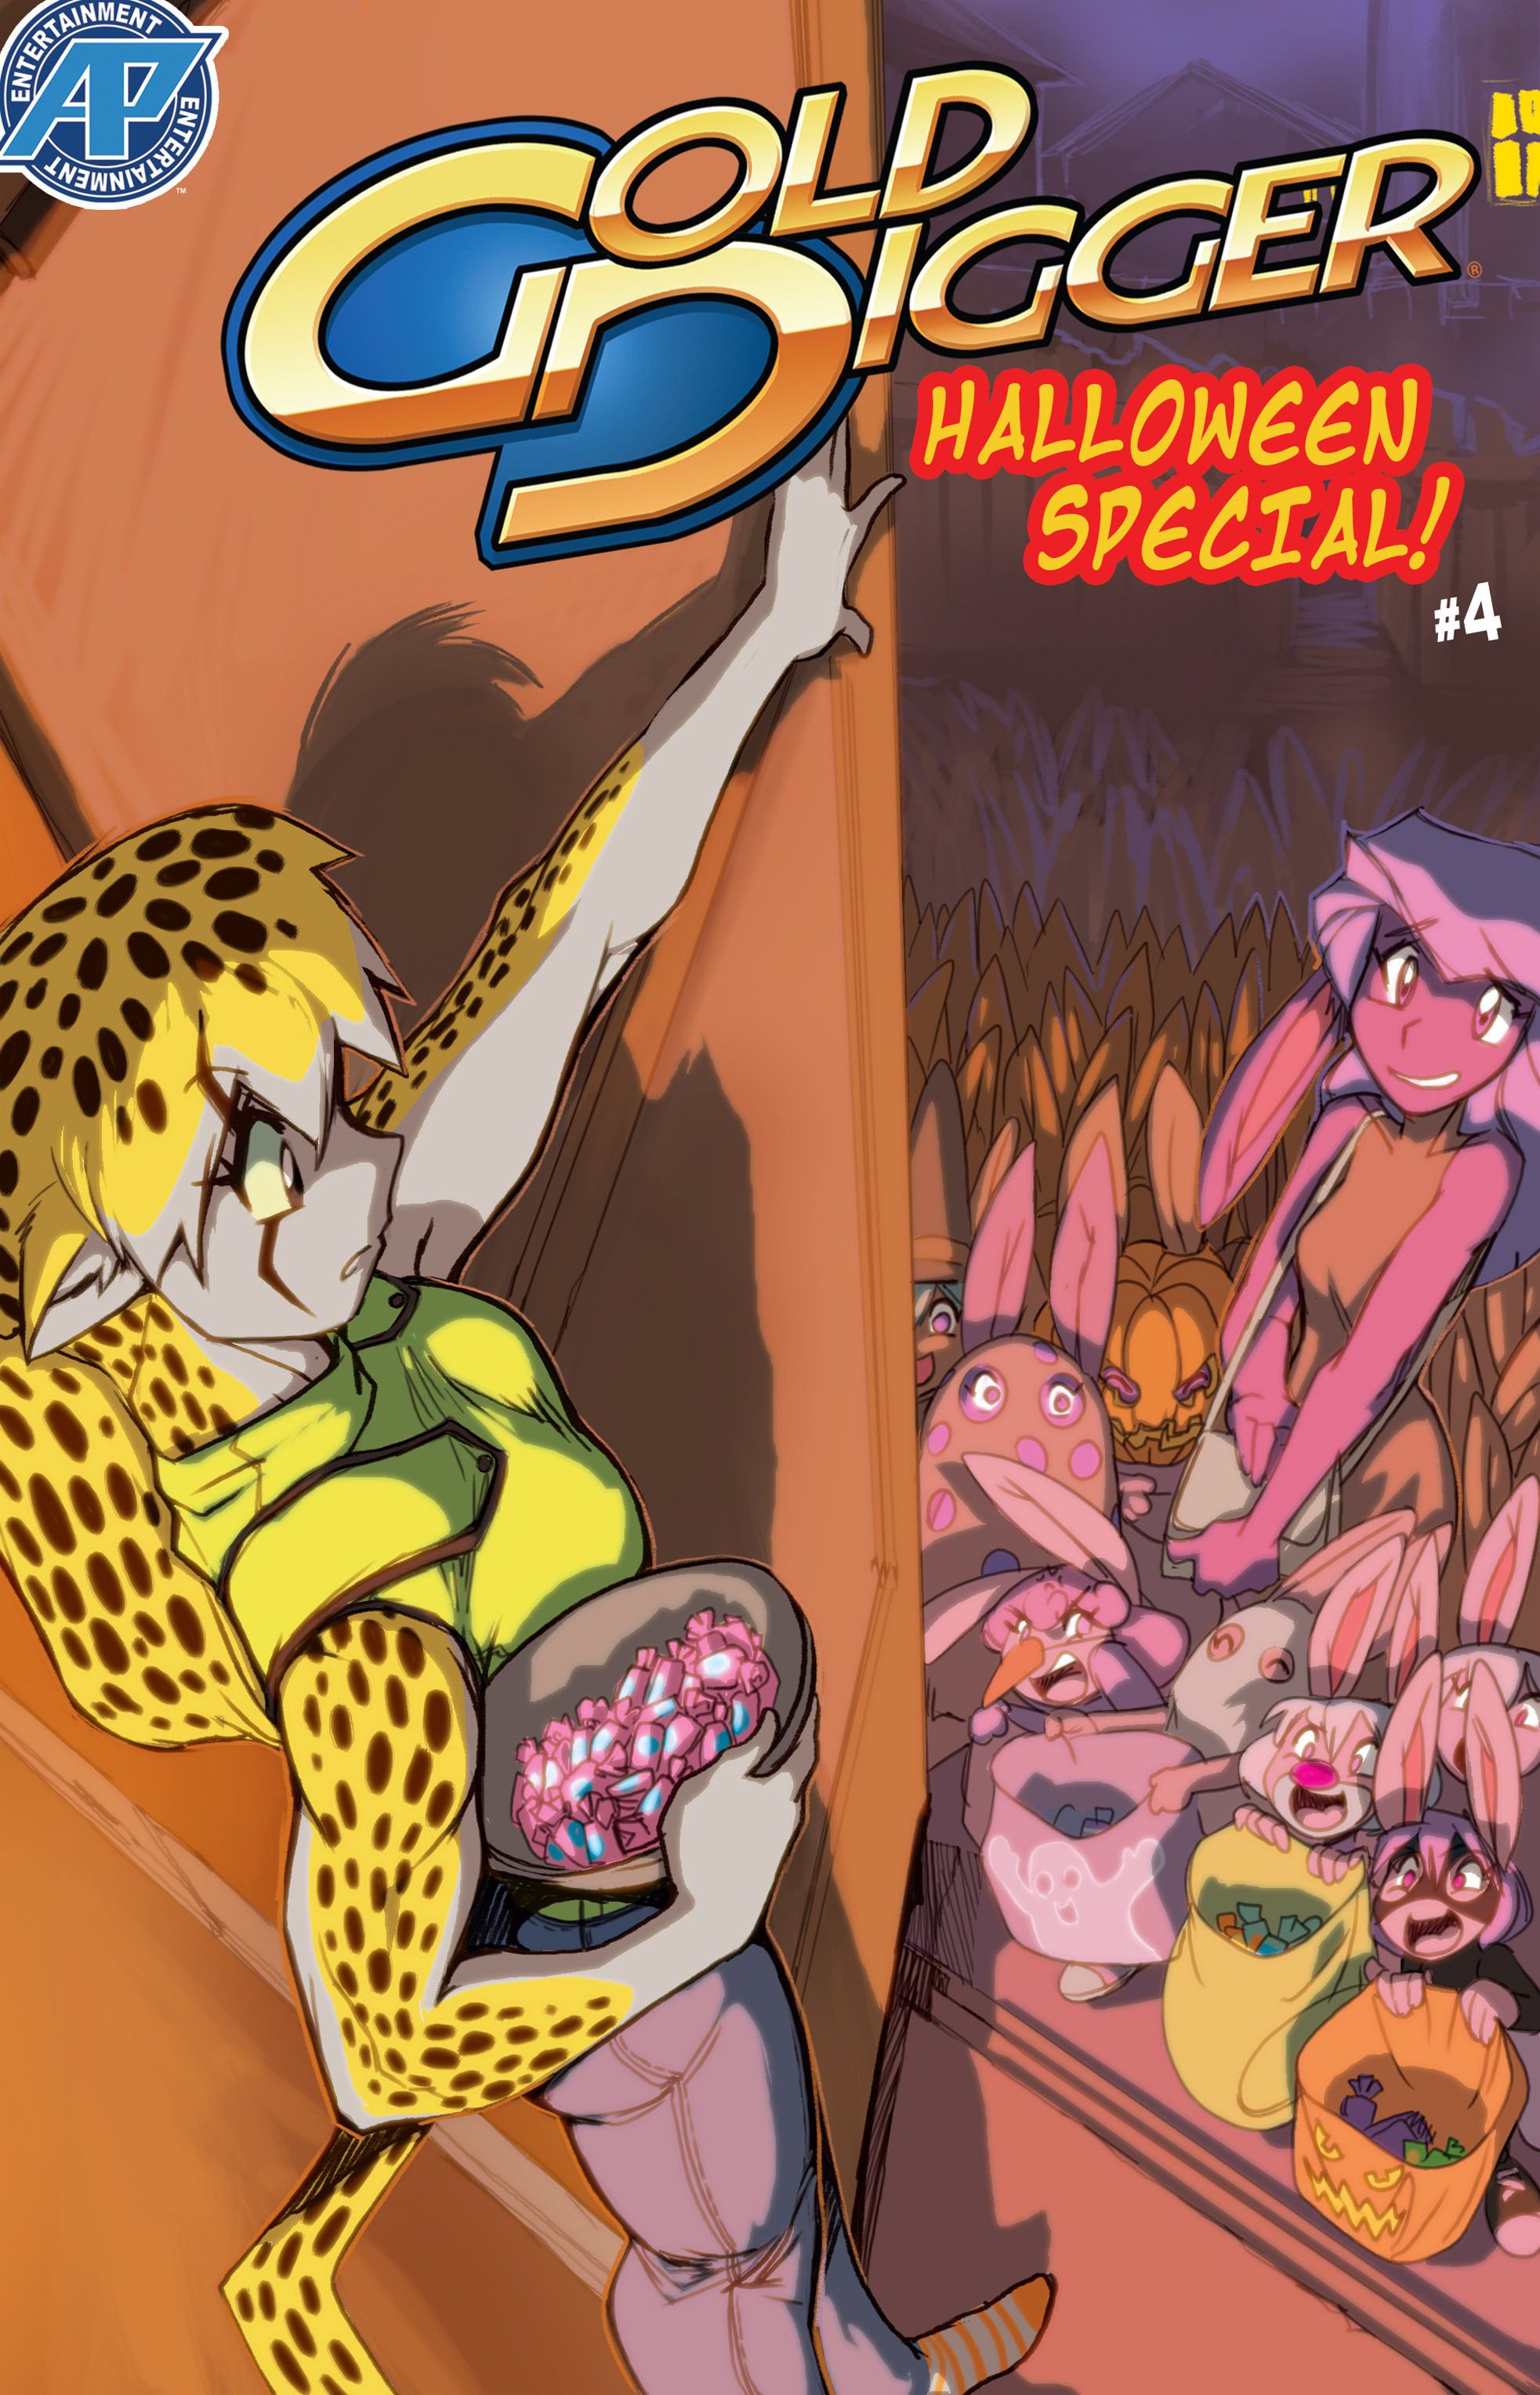 Read online Gold Digger Halloween Special comic -  Issue #4 - 1